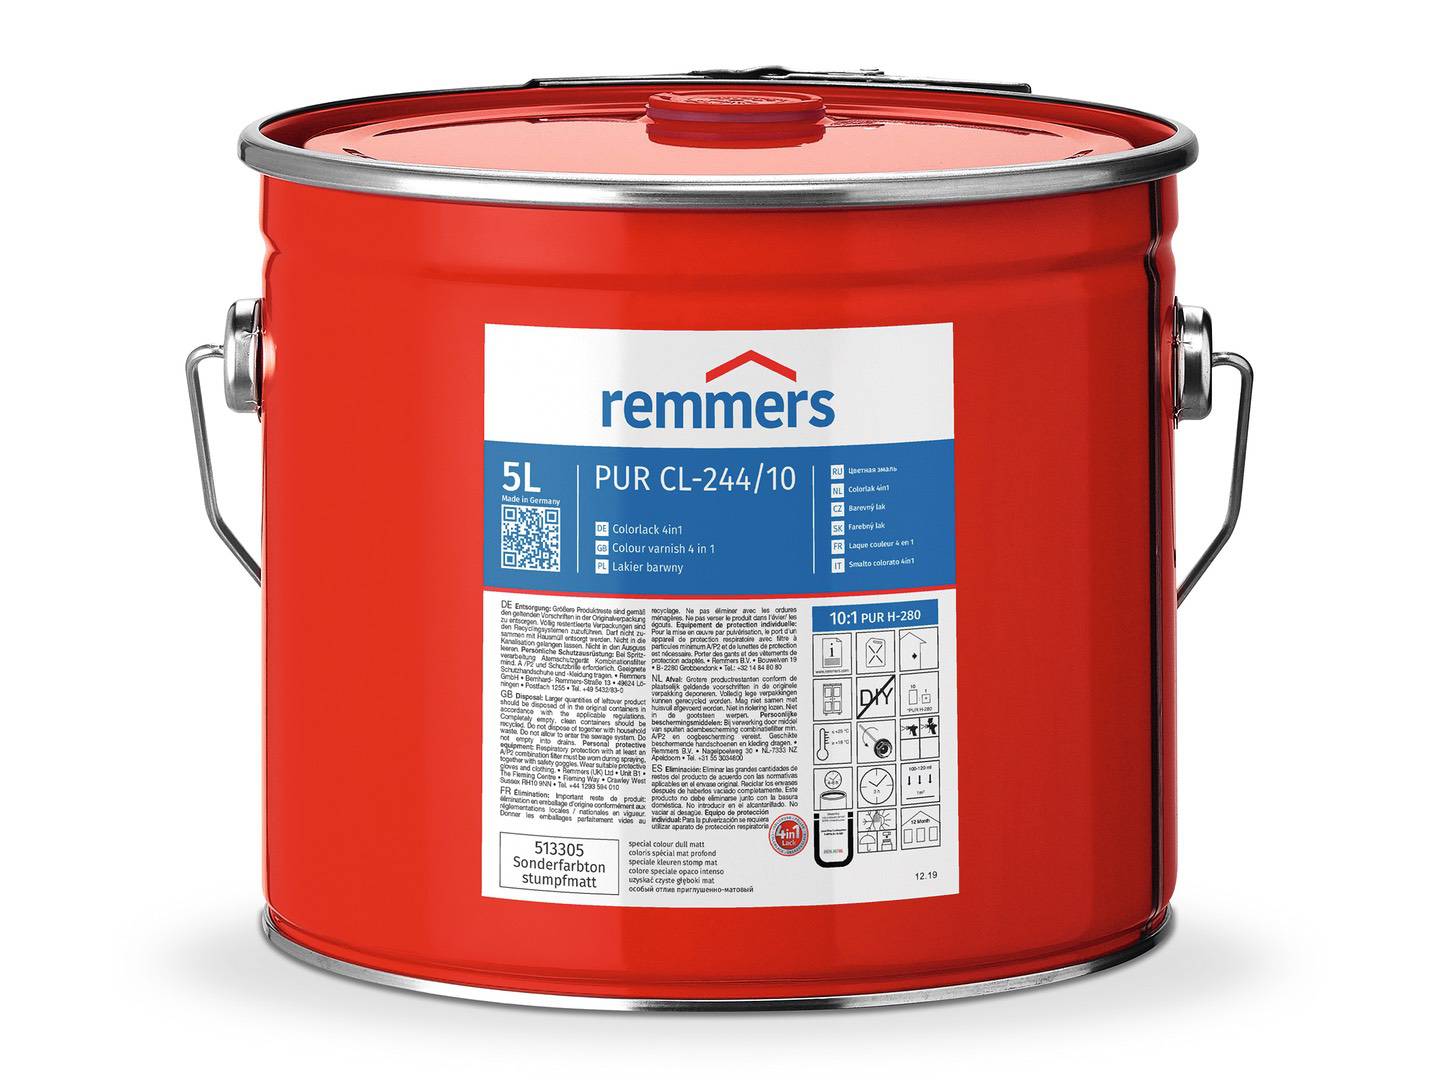 REMMERS PUR CL-244-Colorlack 4in1